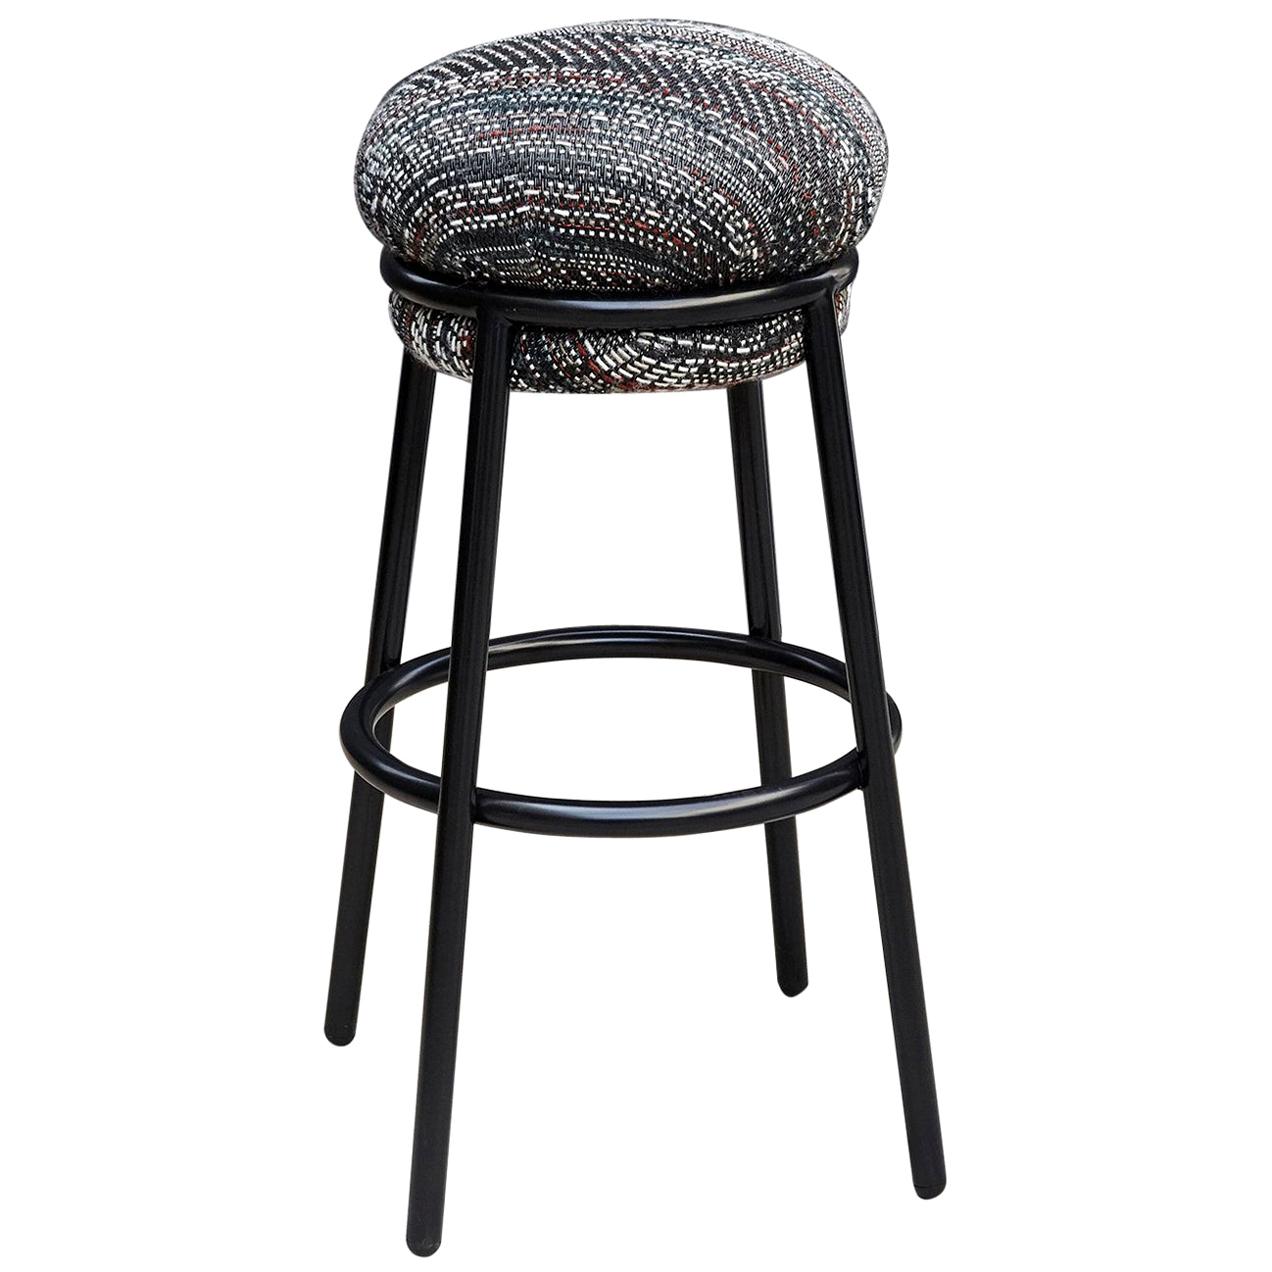 Stephen Burks Grasso Contemporary Fabric Upholstery, Blac Lacquered Metal Stool